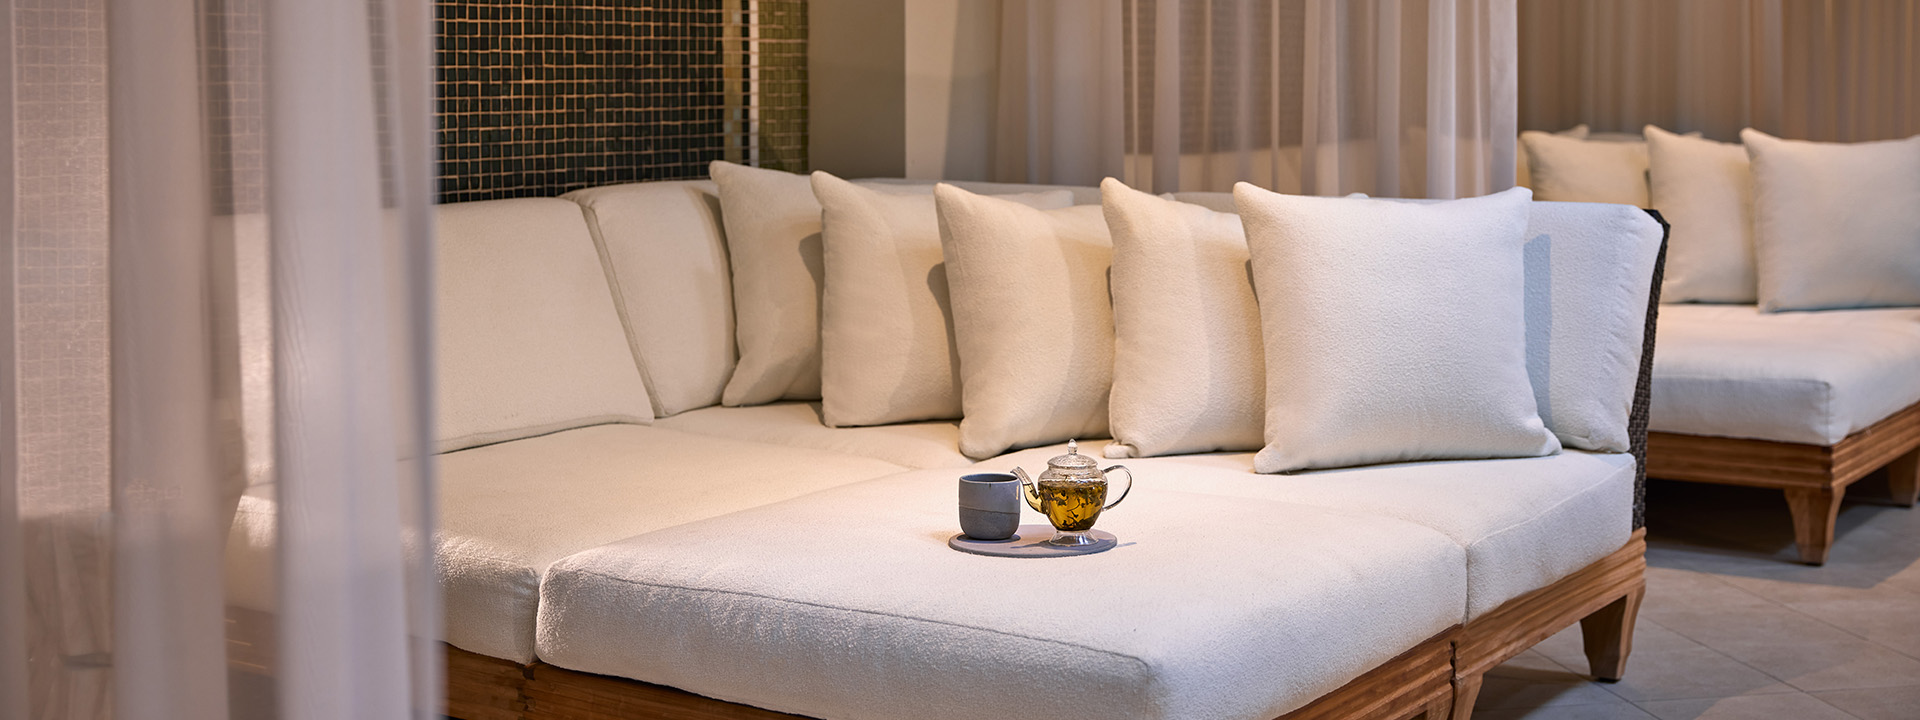 Couch adorned with a charming kettle, cup, and tray invites elegant relaxation and comfort.